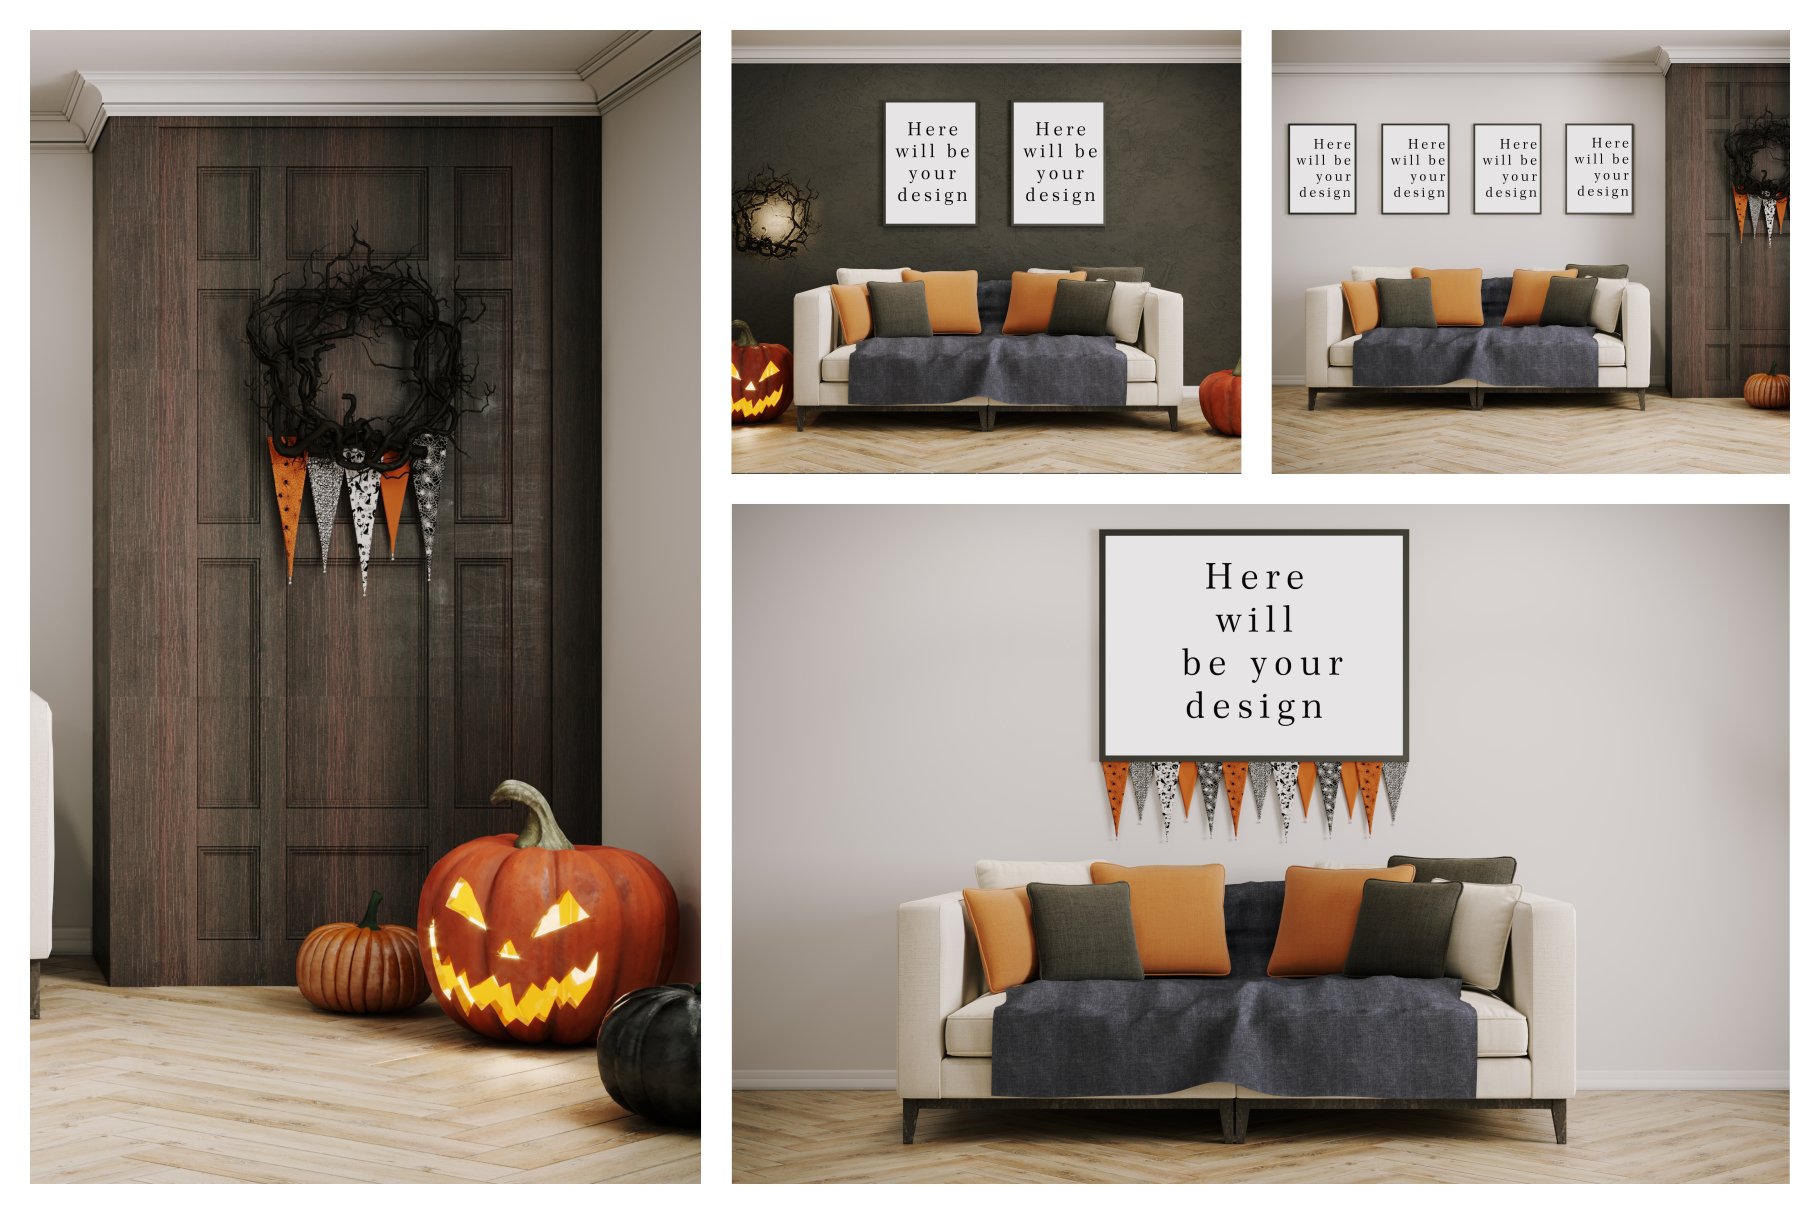 Cool interior for Halloween time.